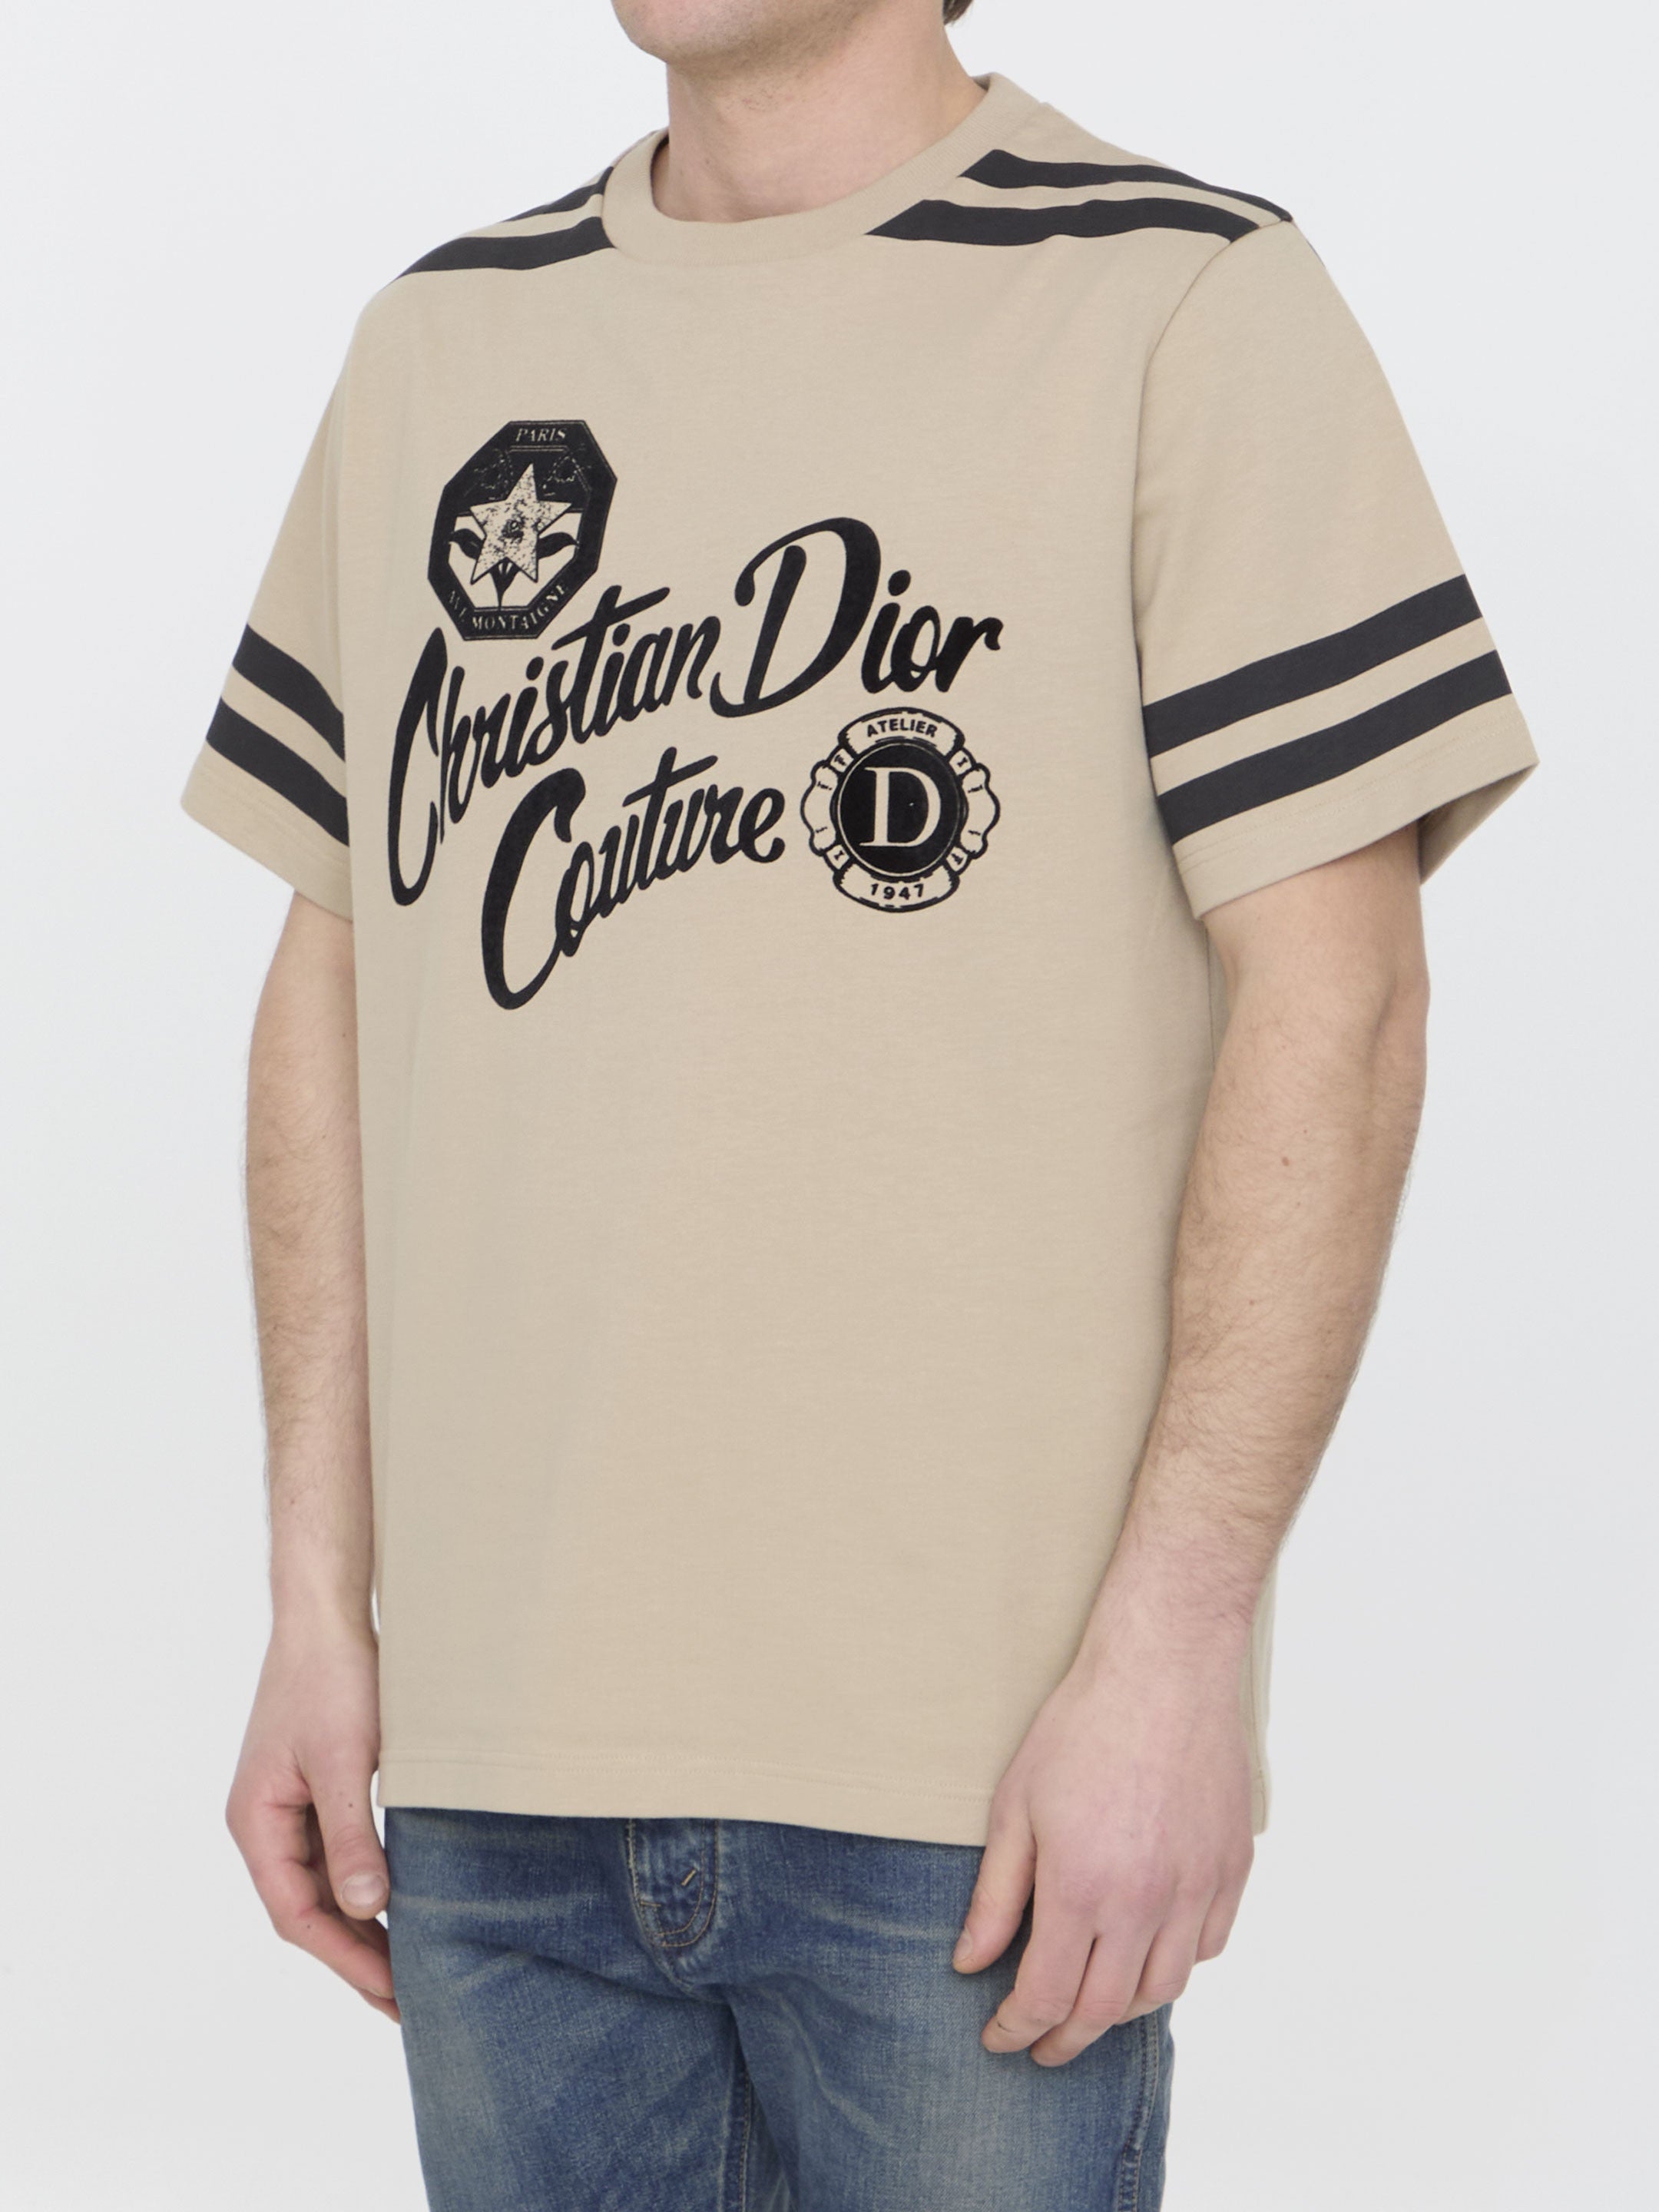 DIOR-HOMME-OUTLET-SALE-Christian-Dior-Couture-t-shirt-Shirts-S-BEIGE-ARCHIVE-COLLECTION-2.jpg